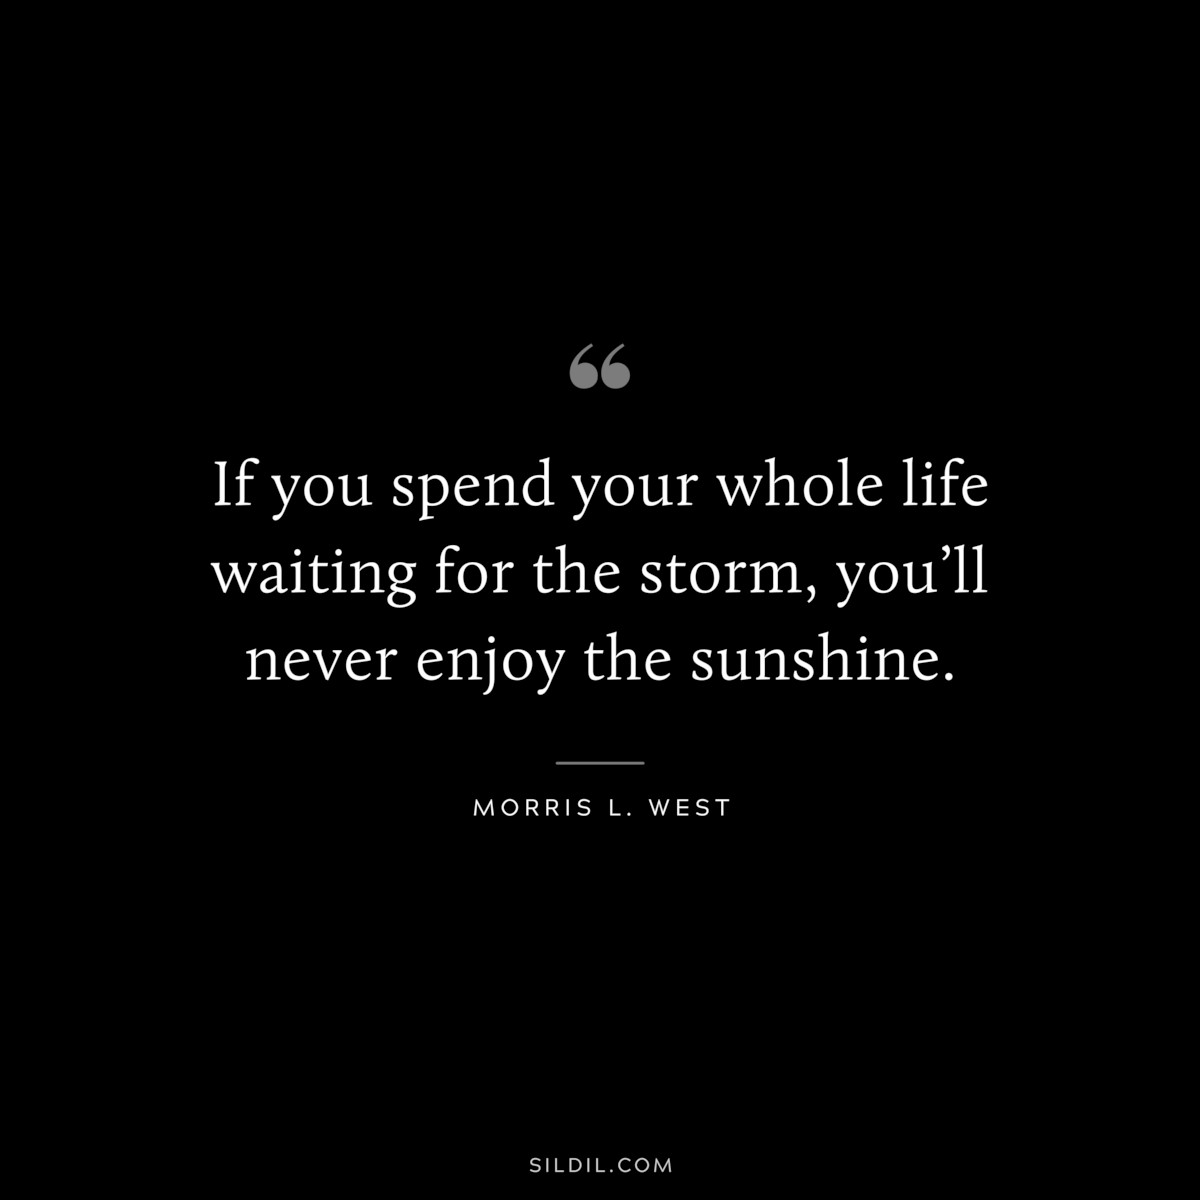 If you spend your whole life waiting for the storm, you’ll never enjoy the sunshine. ― Morris L. West